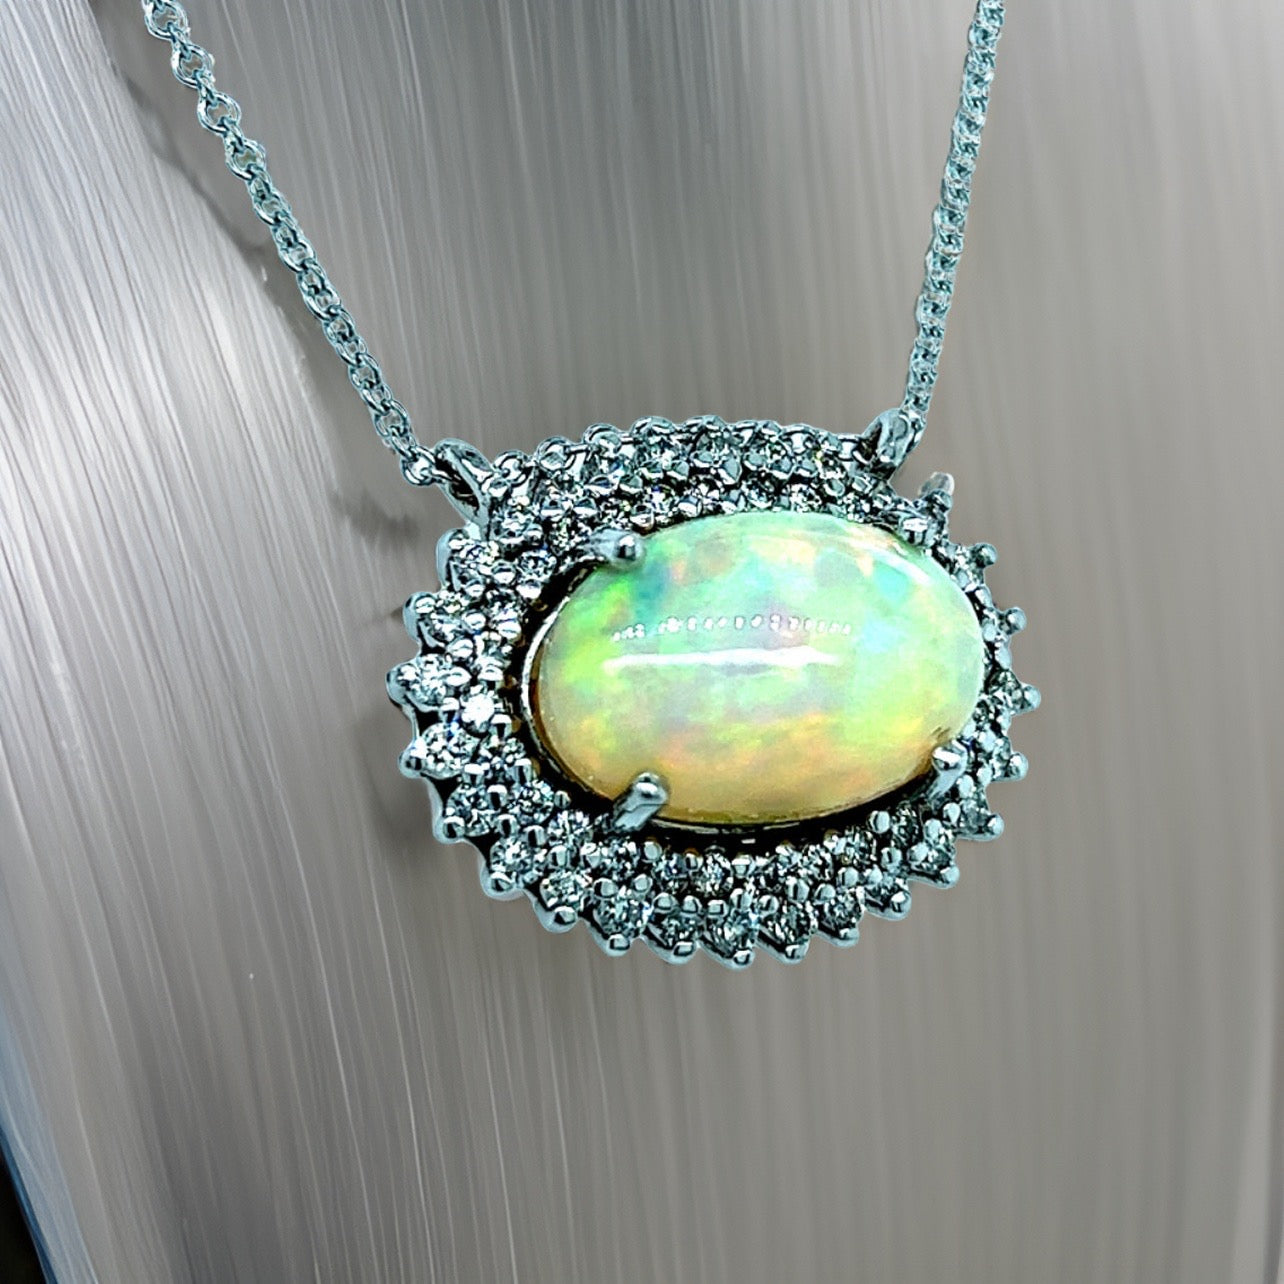 Natural Opal Diamond Pendant Necklace 18" 14k Gold 5.81 TCW Certified $5,950 301789 - Certified Fine Jewelry